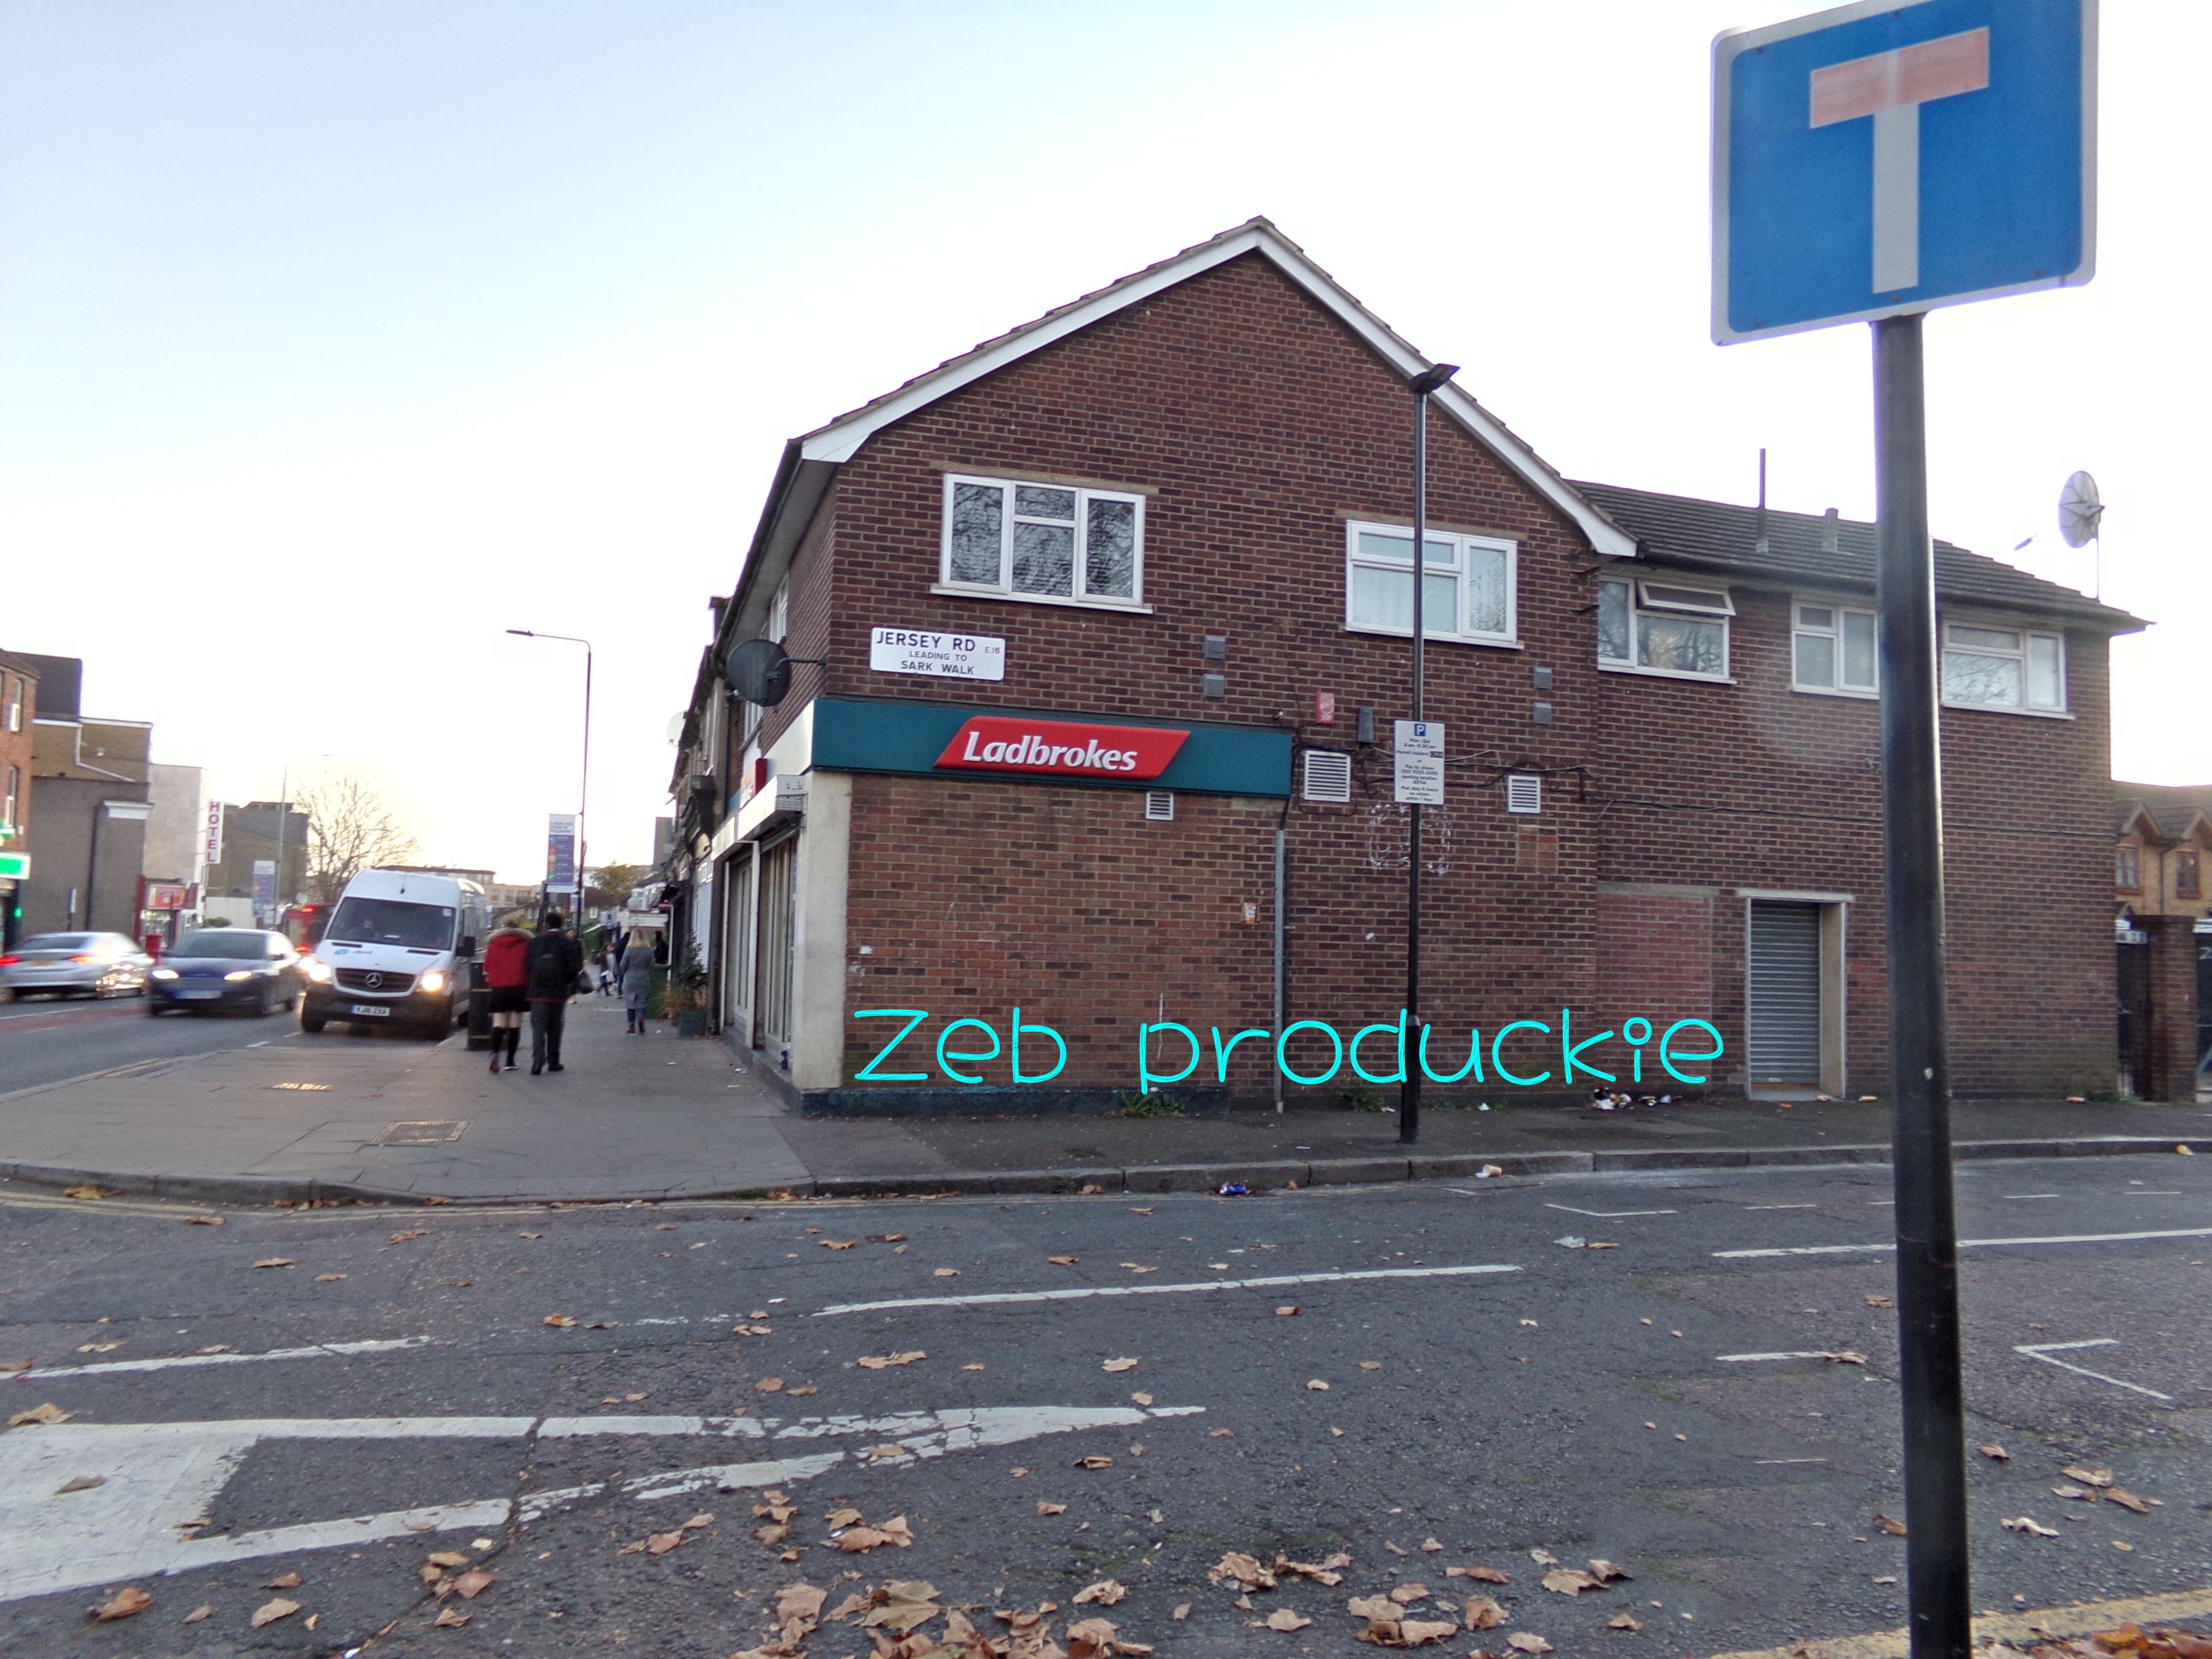 A picture of a side road in East London. There is a sign on the left showing a dead end. There is a brown brick building with a rectangular teal and red sign, white text reads "Ladbrokes". Theres a busy street in the background. There are brown leaves on the ground.